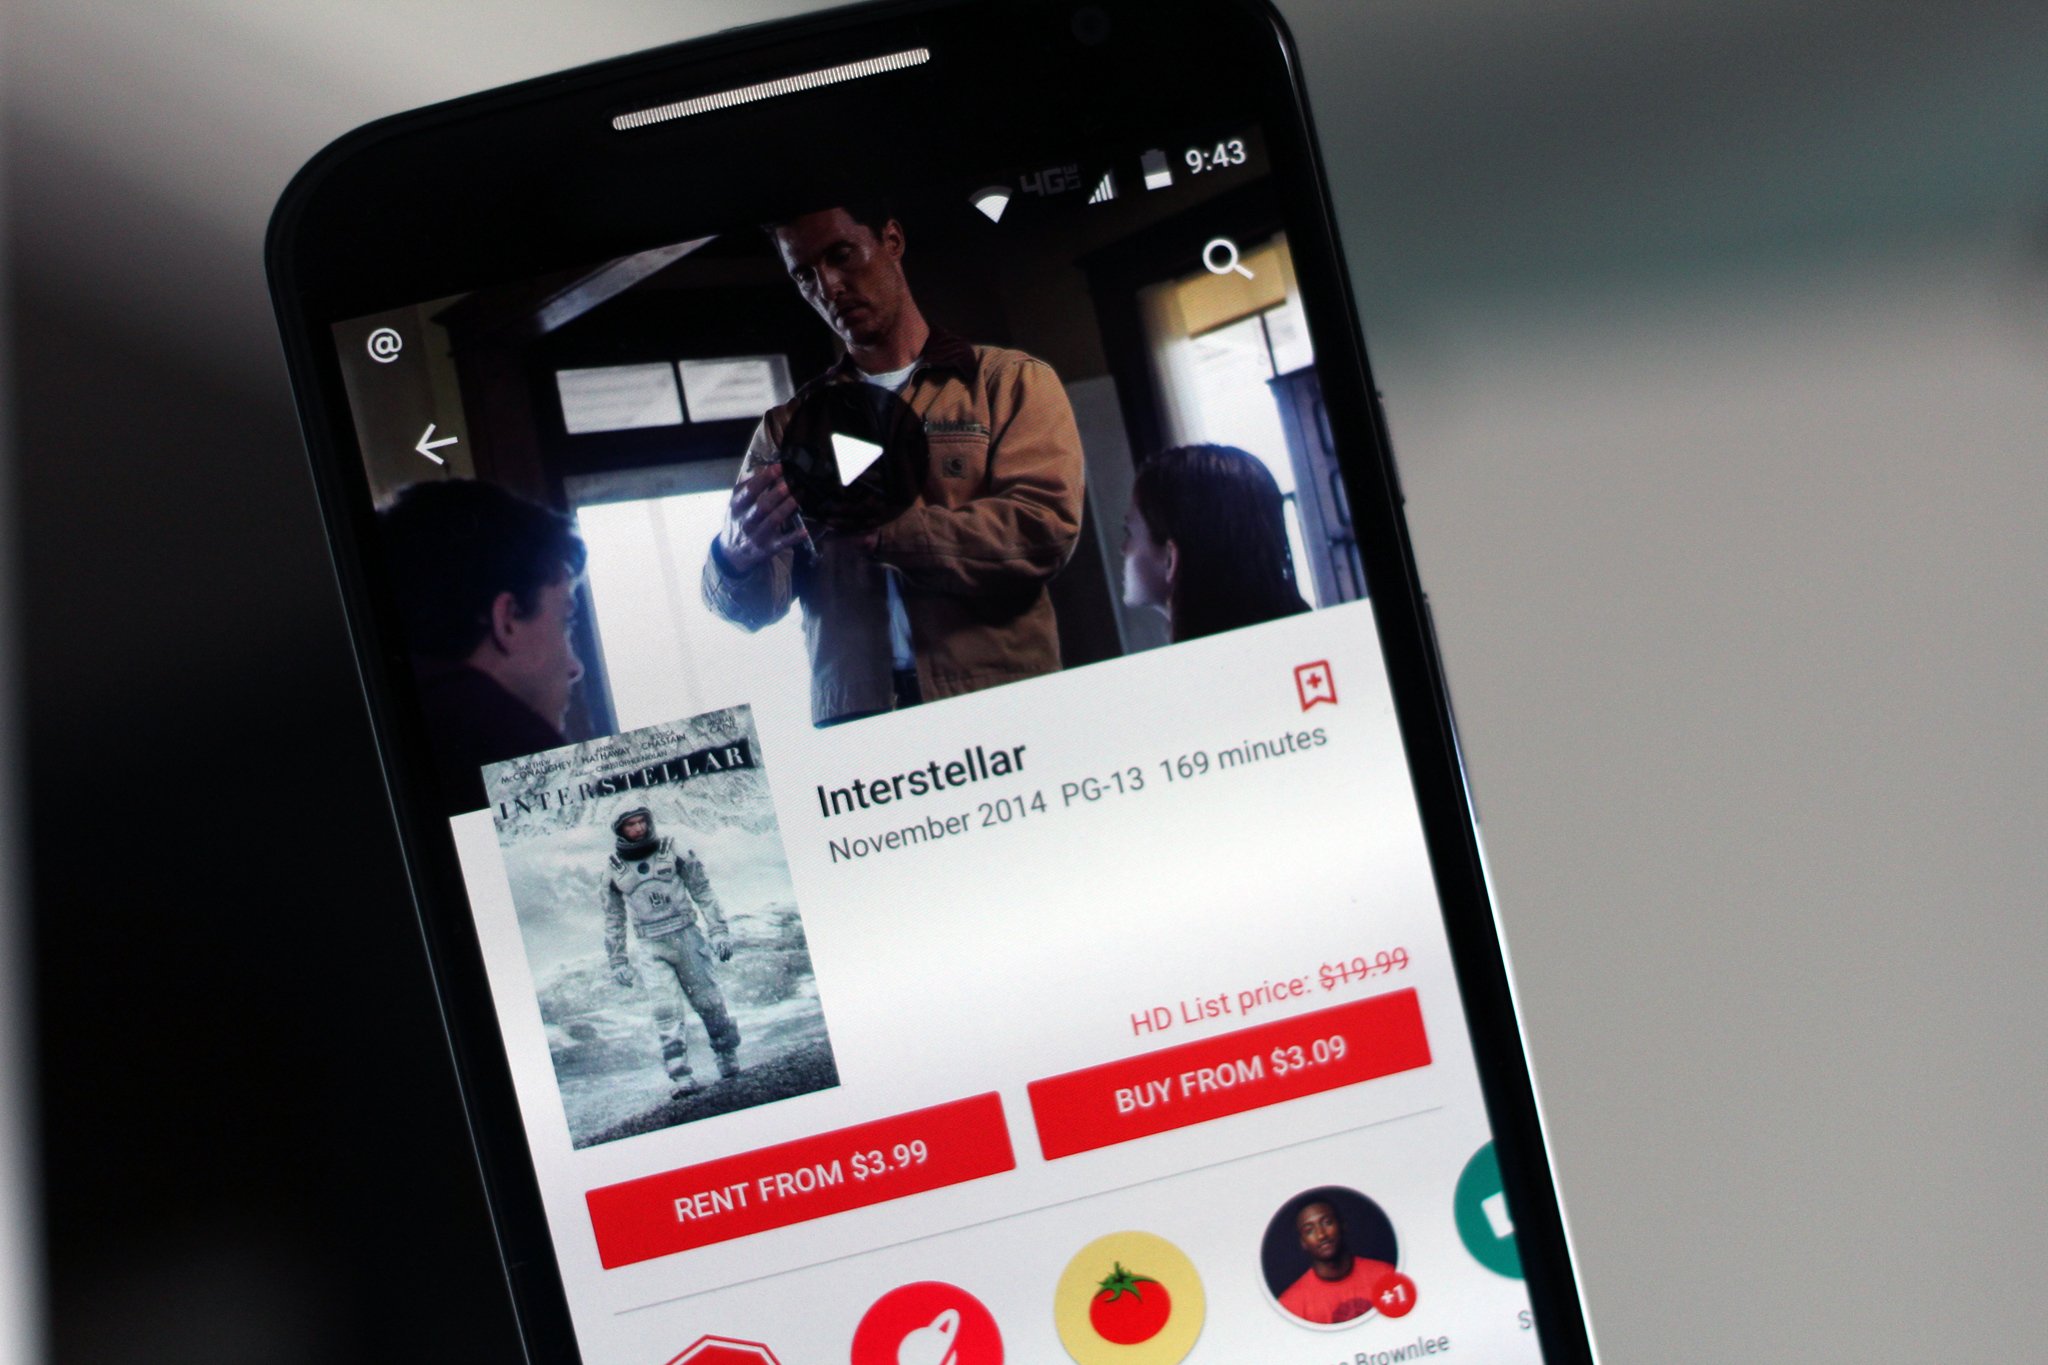 Google Play discounts select movies to $4